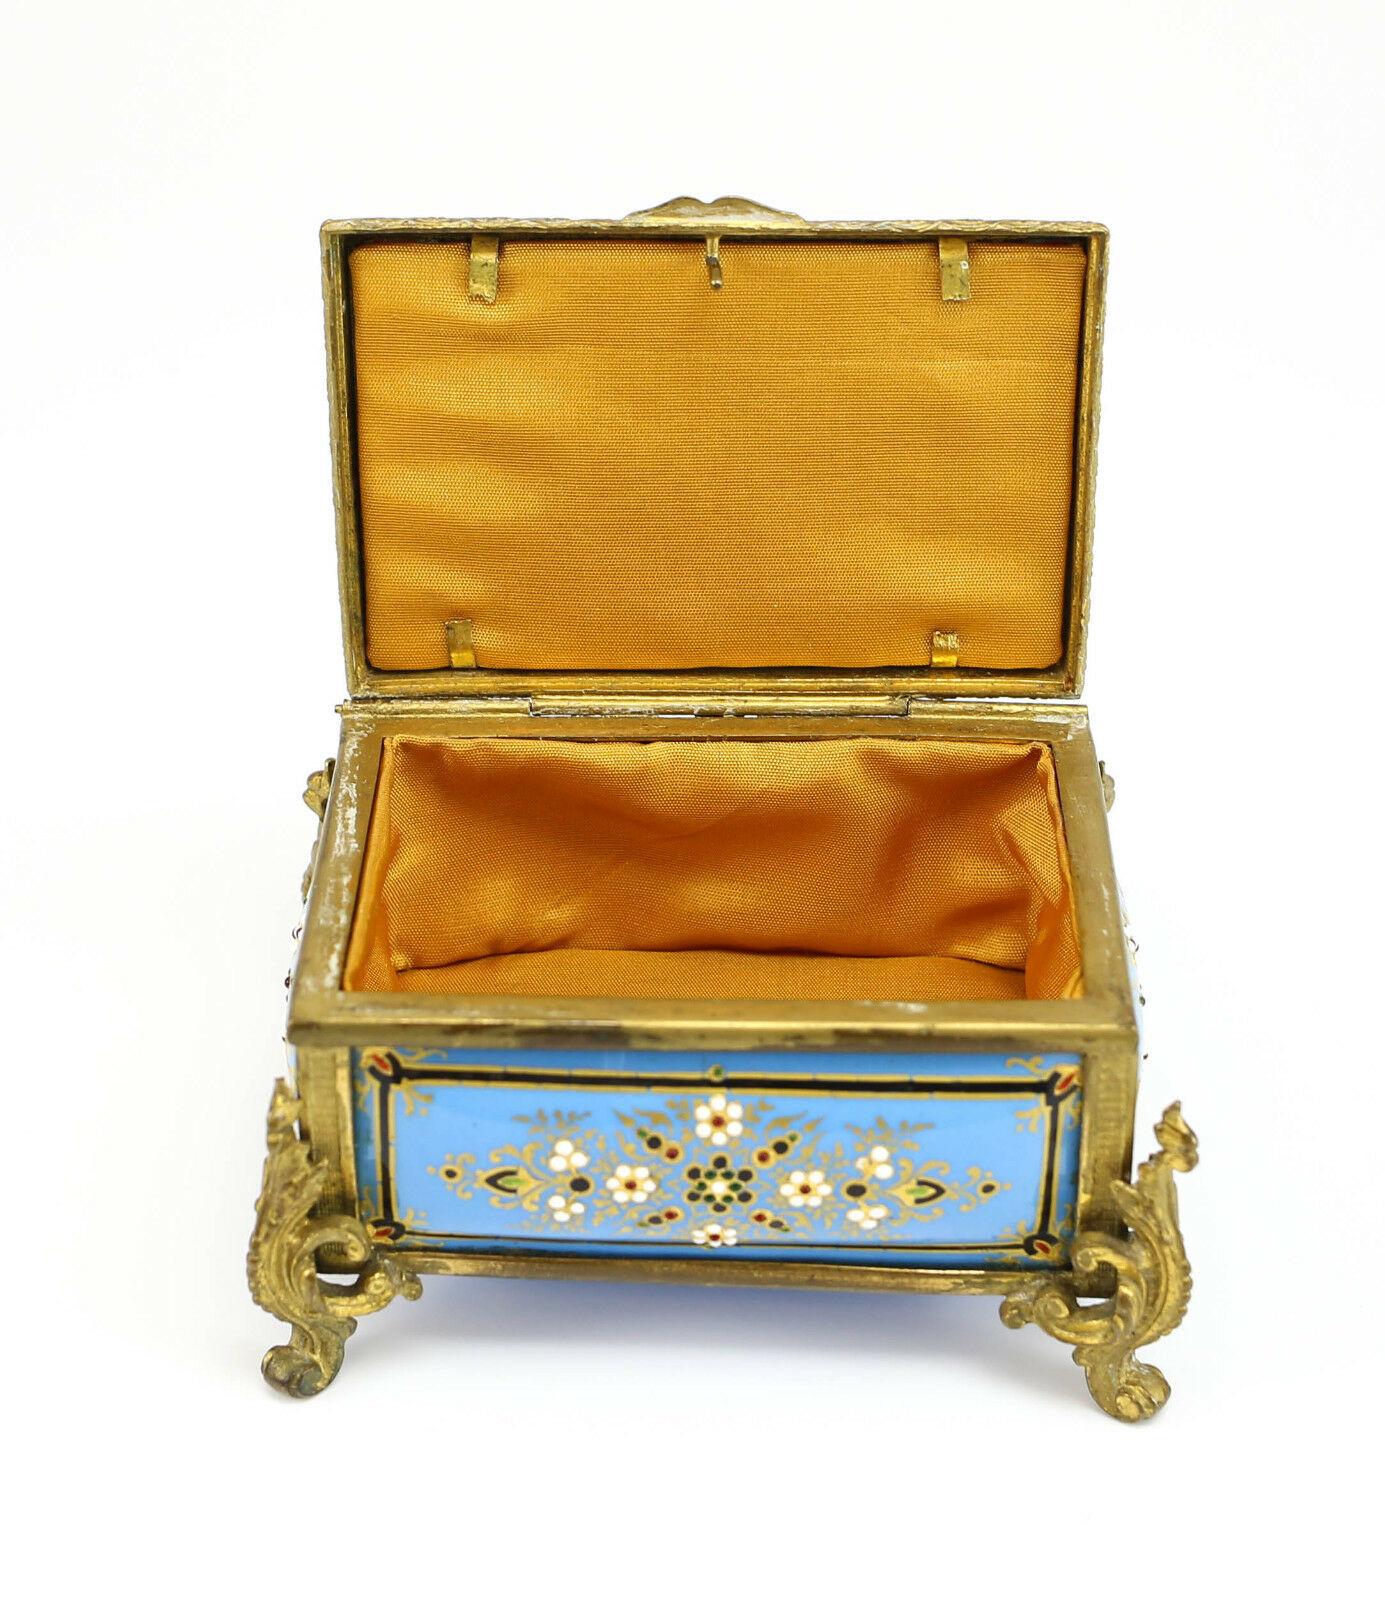 French gilt bronze & porcelain jewelry box, powder blue & raised floral enamel.

Additional Information:
Brand: Unbranded 
Type: Jewelry Box
Color: Blue
Dimension: 4”x 2.875 x 2.75
Condition: Good condition. Light oxidation to the bronze.